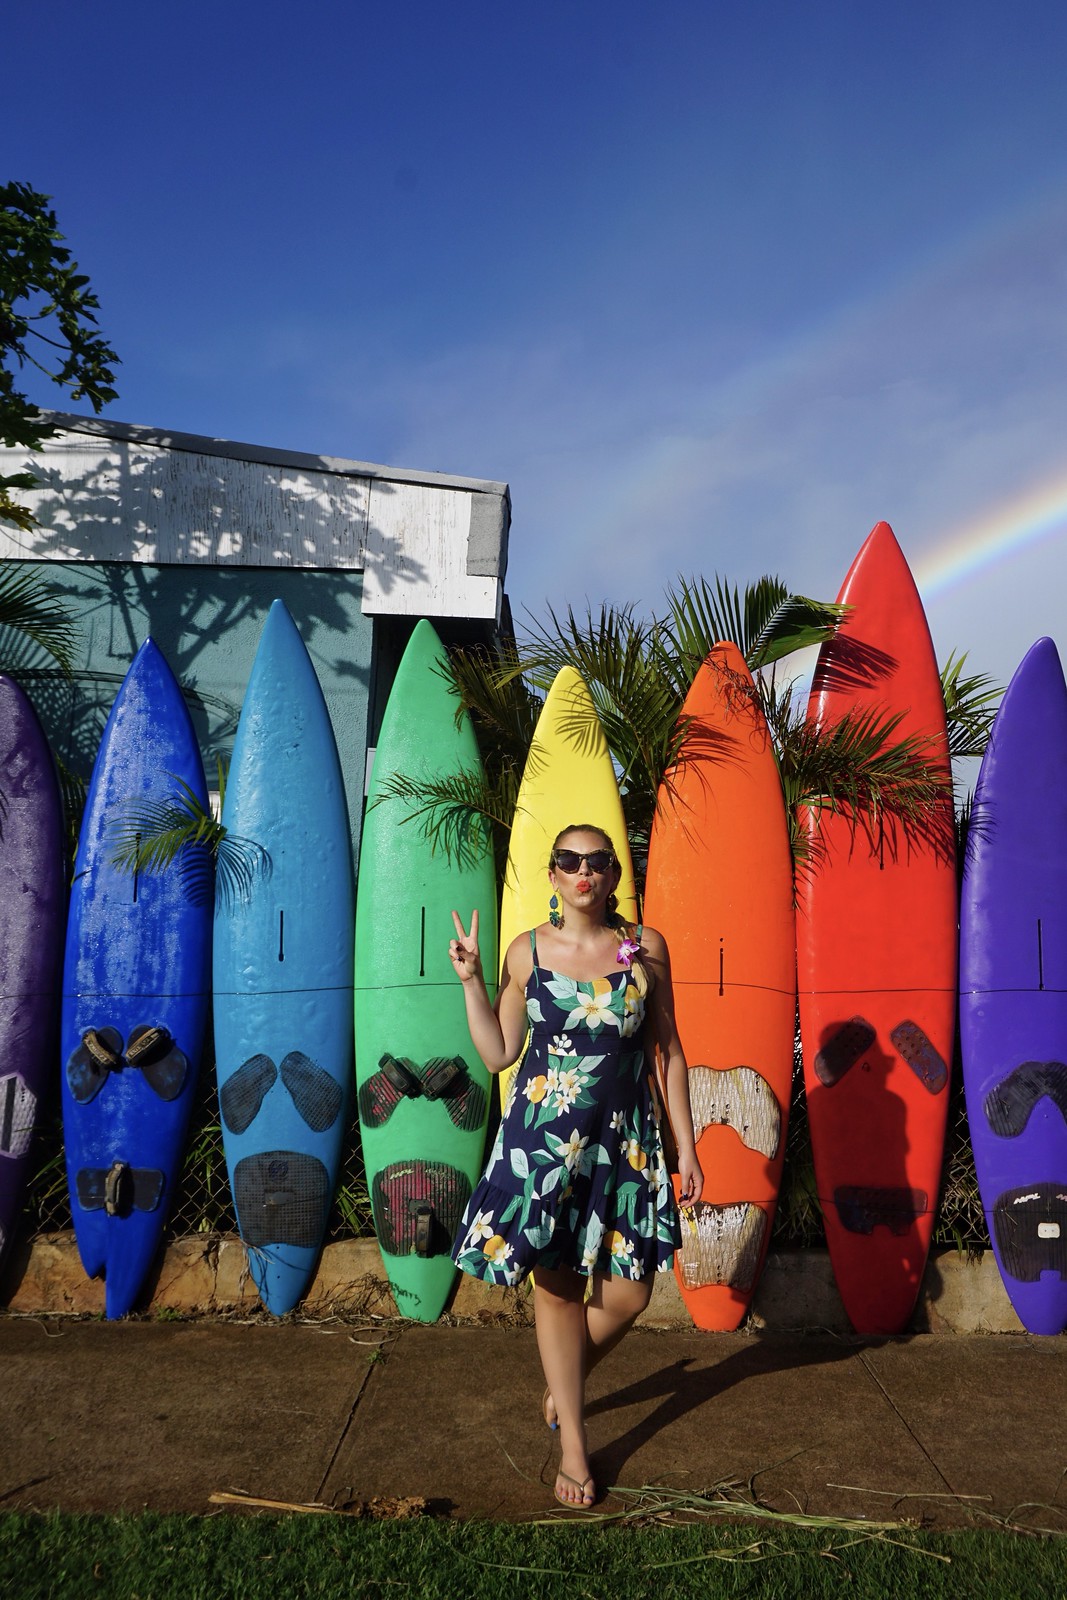 Aloha Surf Hostel Paia Maui Surfboard Fence Wall Colorful Most Instagrammable Places in Hawaii